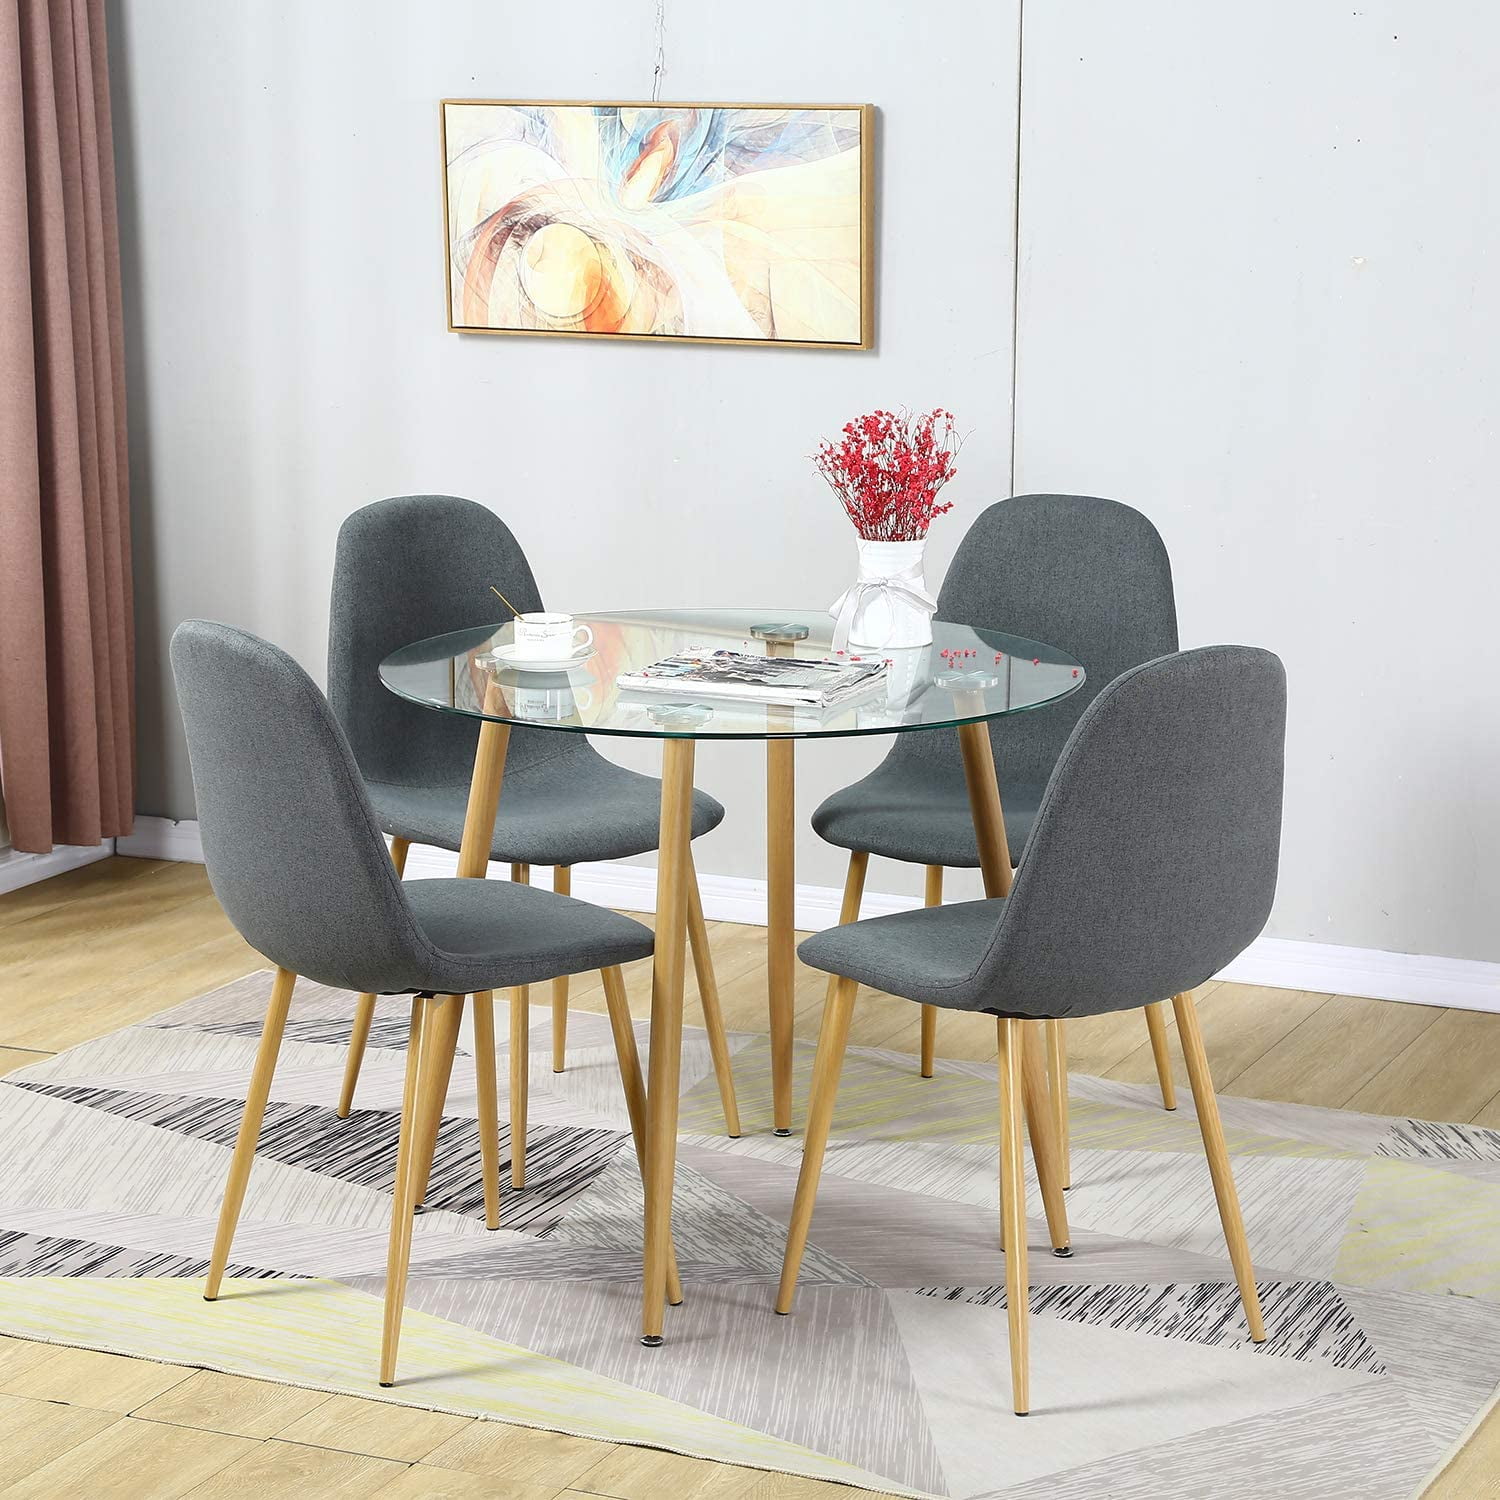 GOLDFAN Dining Table and 2 Chairs Modern Round Glass Kitchen Table and Velvet Chairs Dining Room Sets 80CM,Grey 